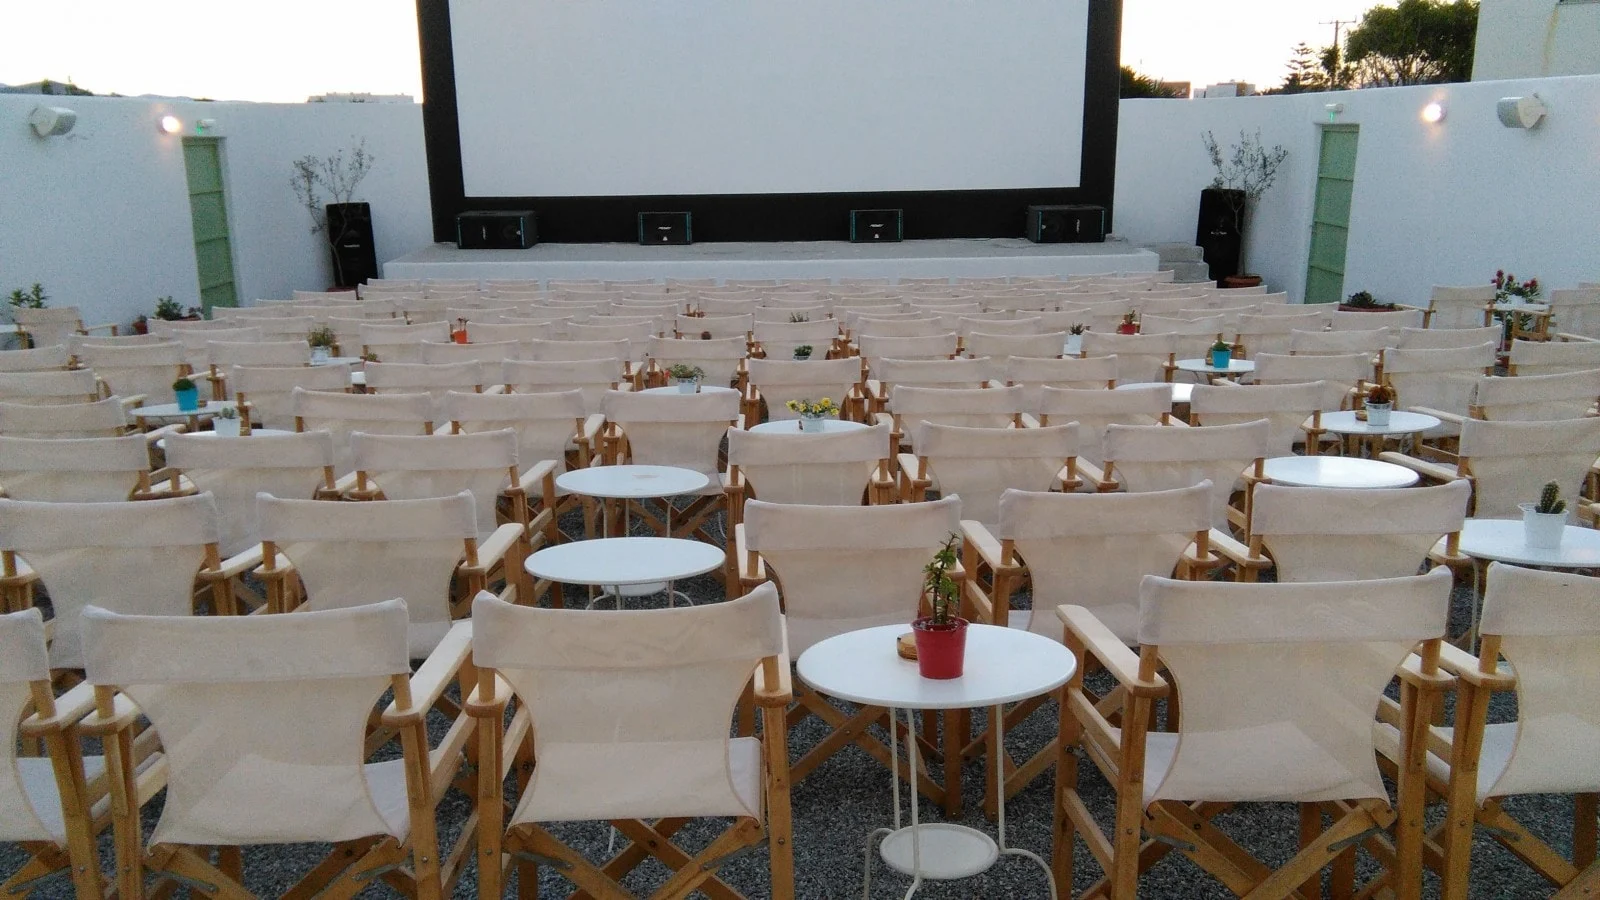 Things To Do In Naxos - 10 Amazing Places You Need To Explore - Outdoor cinema in Naxos